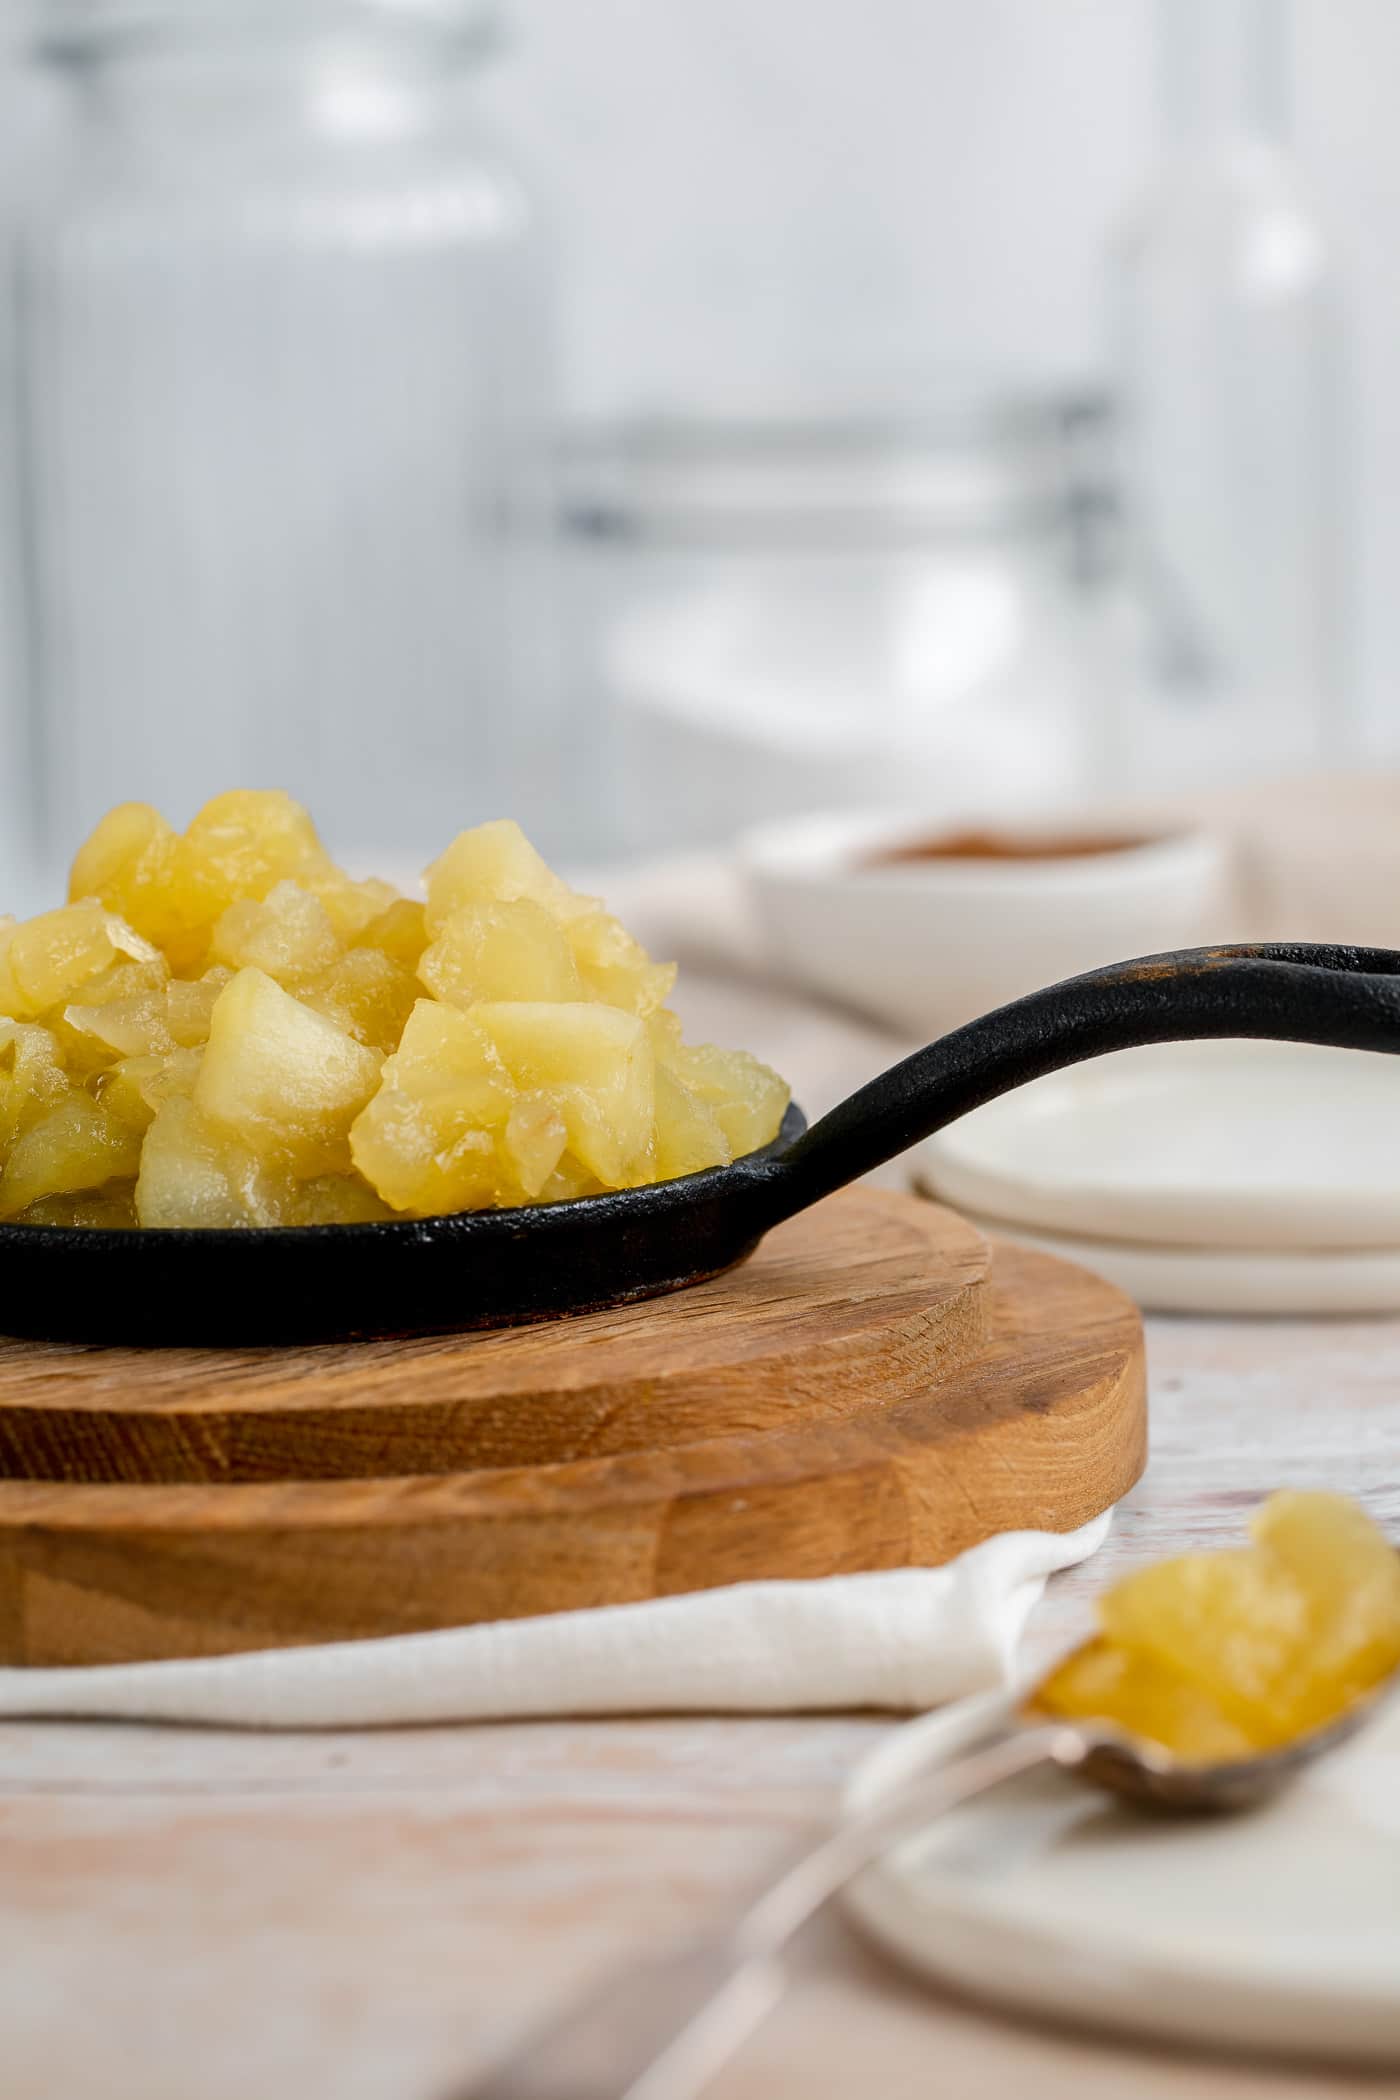 stewed apples on a small black skillet on a round wooden chopping board with glass jars and small white plates in the background. A spoon with stewed apples on lies on a small white plate to the fore.